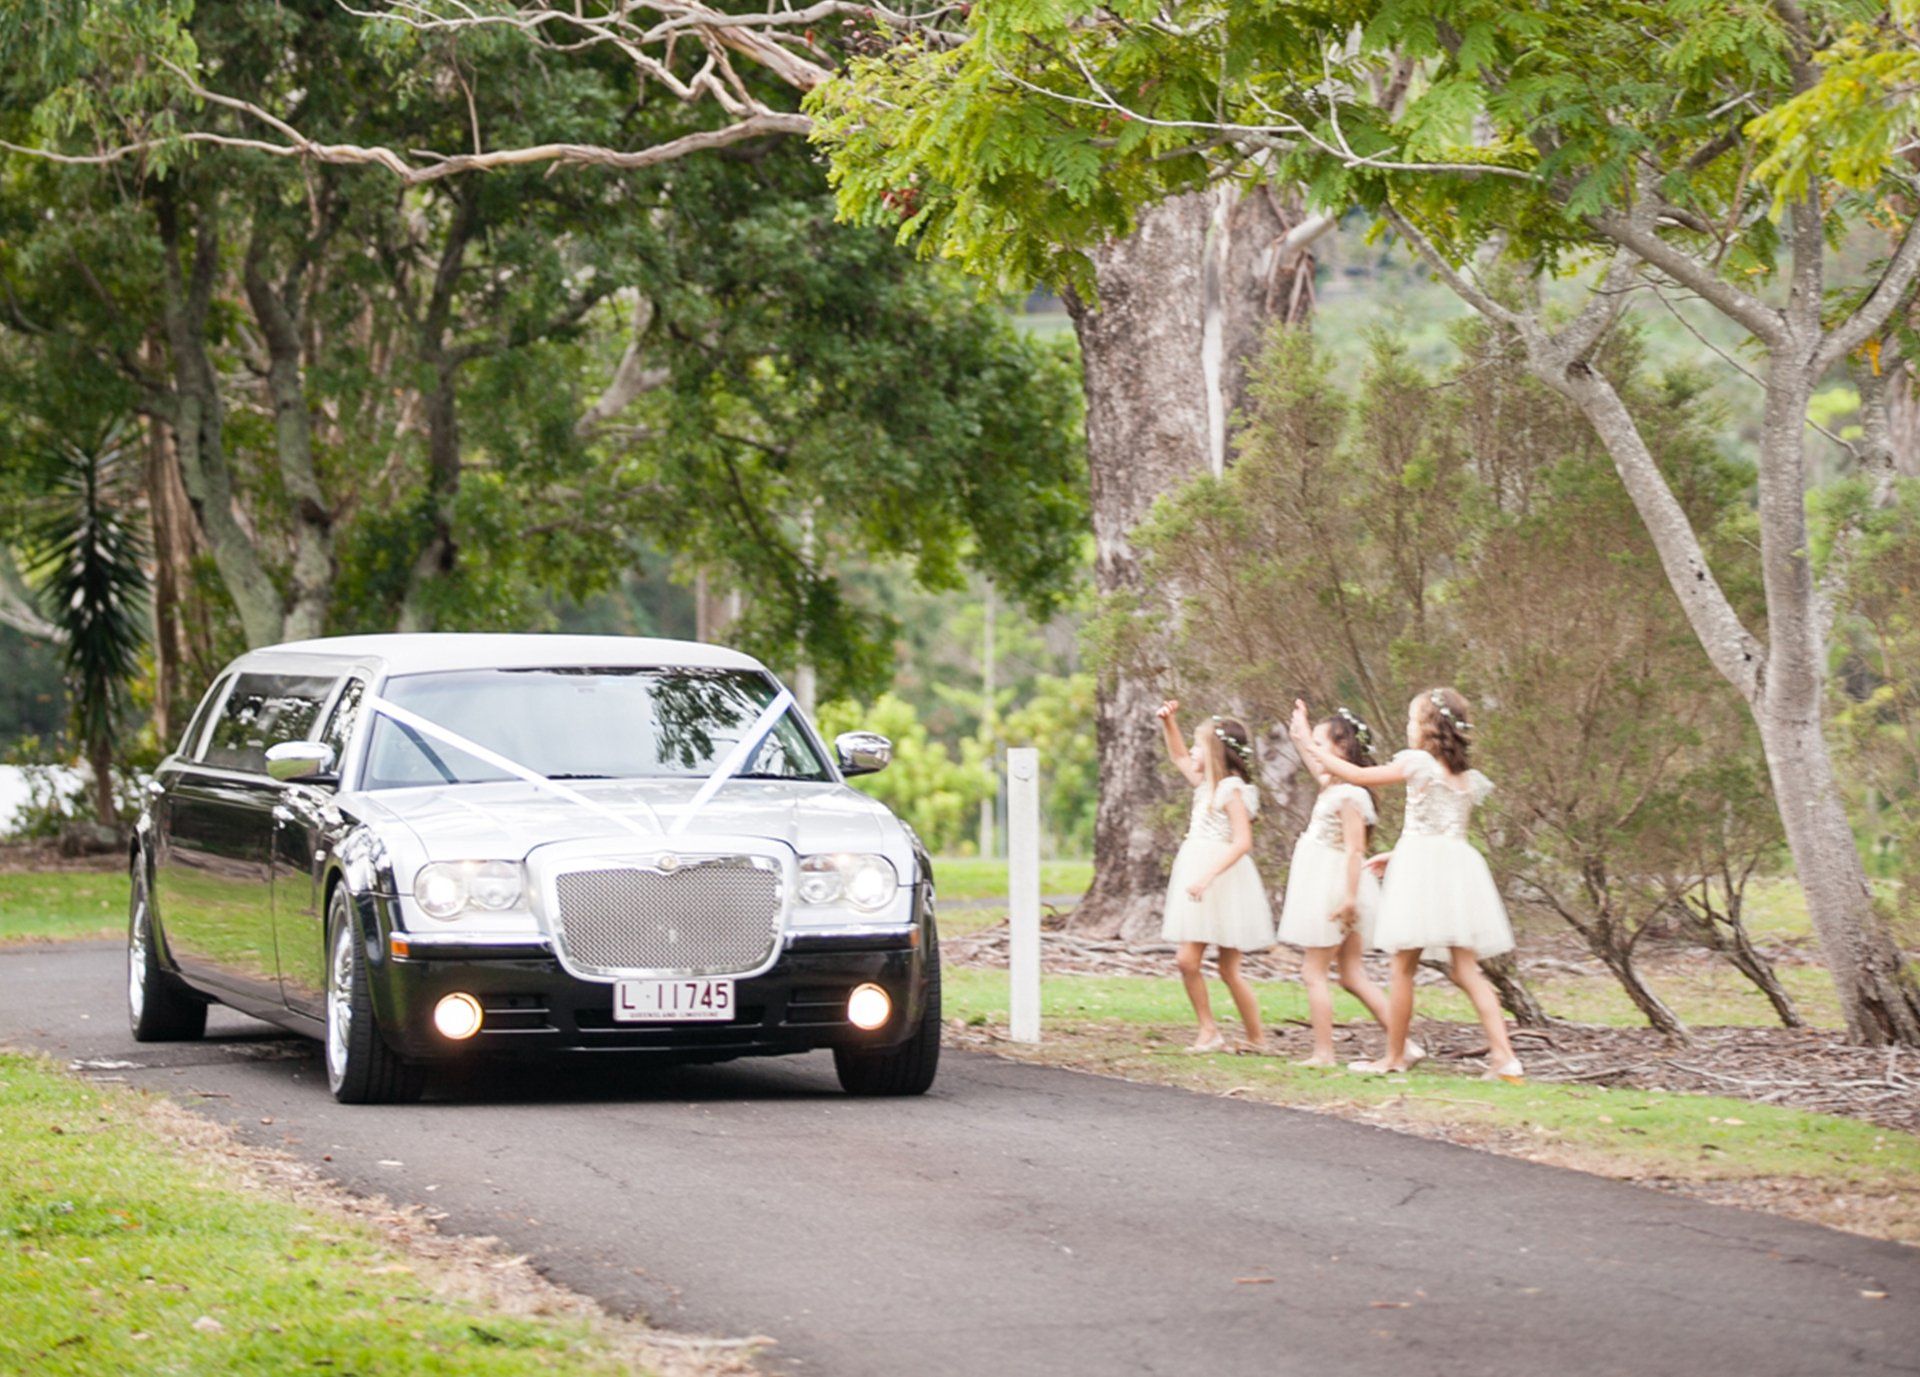 Wedding Limousine — Superstretch300 Limousines in Golden Beach, QLD